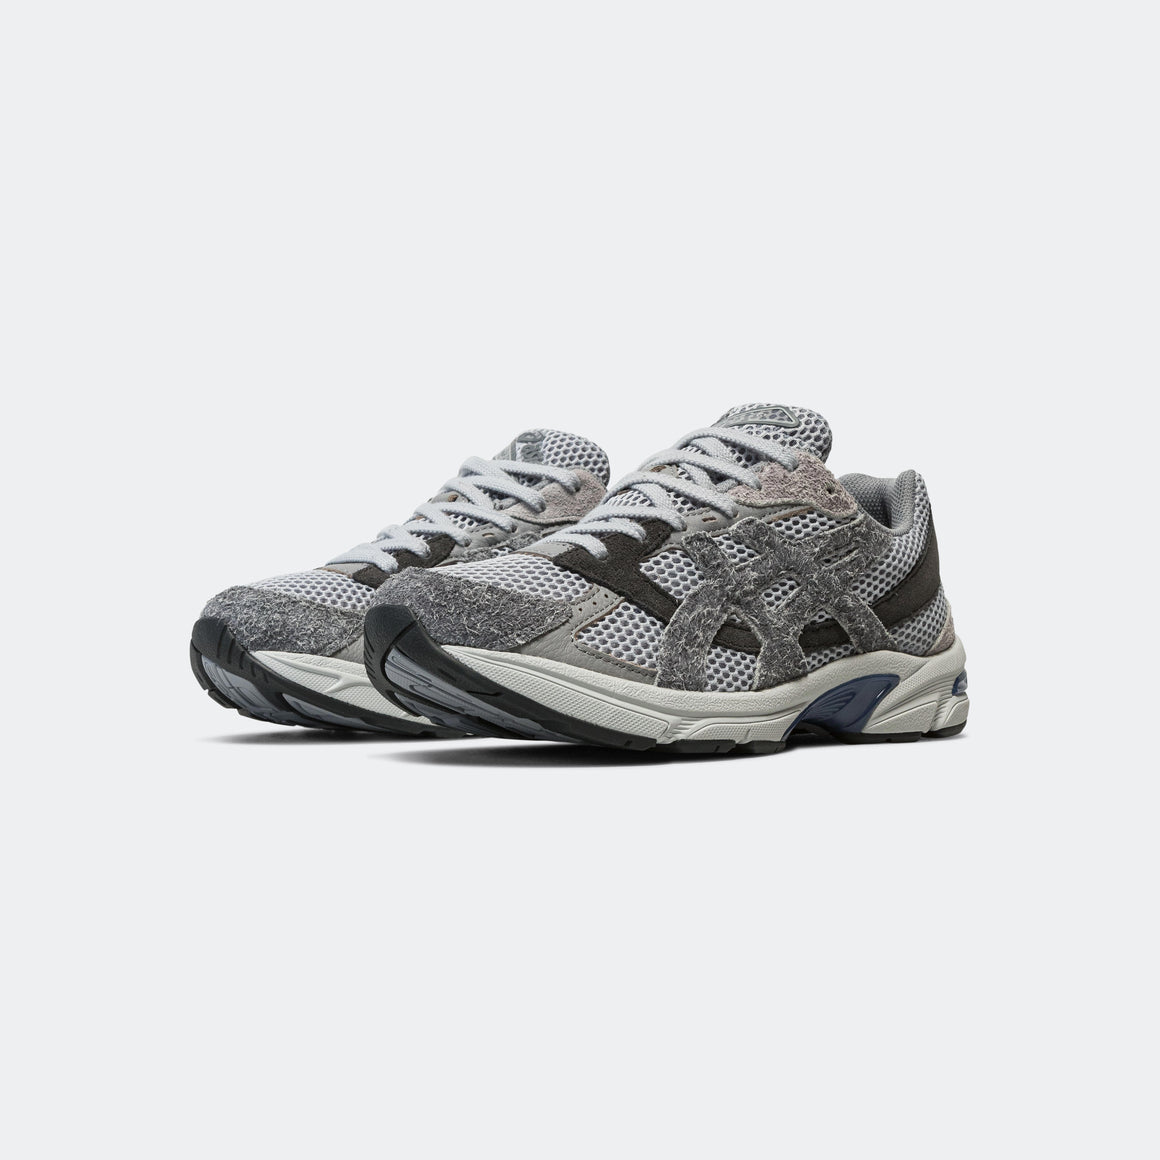 Asics - GEL-1130 - Mid Grey/Steel Grey - UP THERE